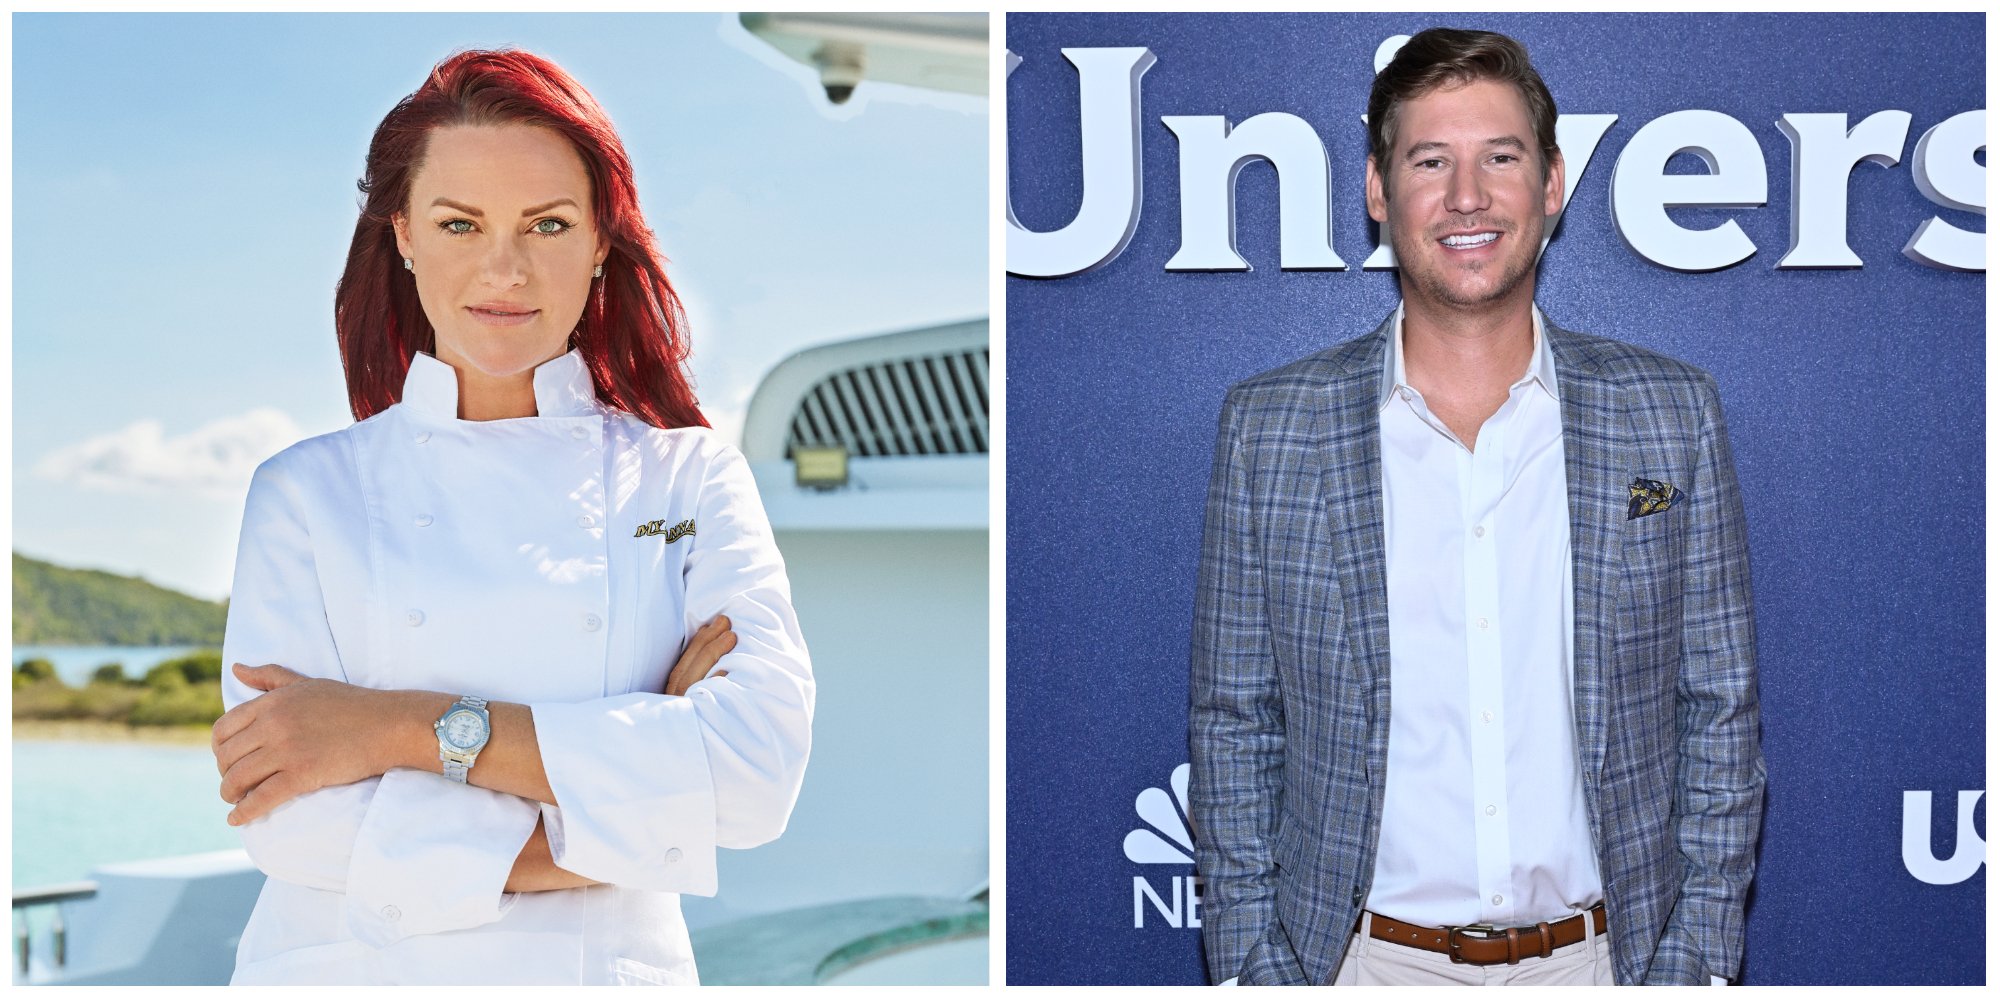 Chef Rachel Hargrove 'Below Deck' cast photo with arms folded. Austen Kroll smiles for a photo with hands in pockets. 